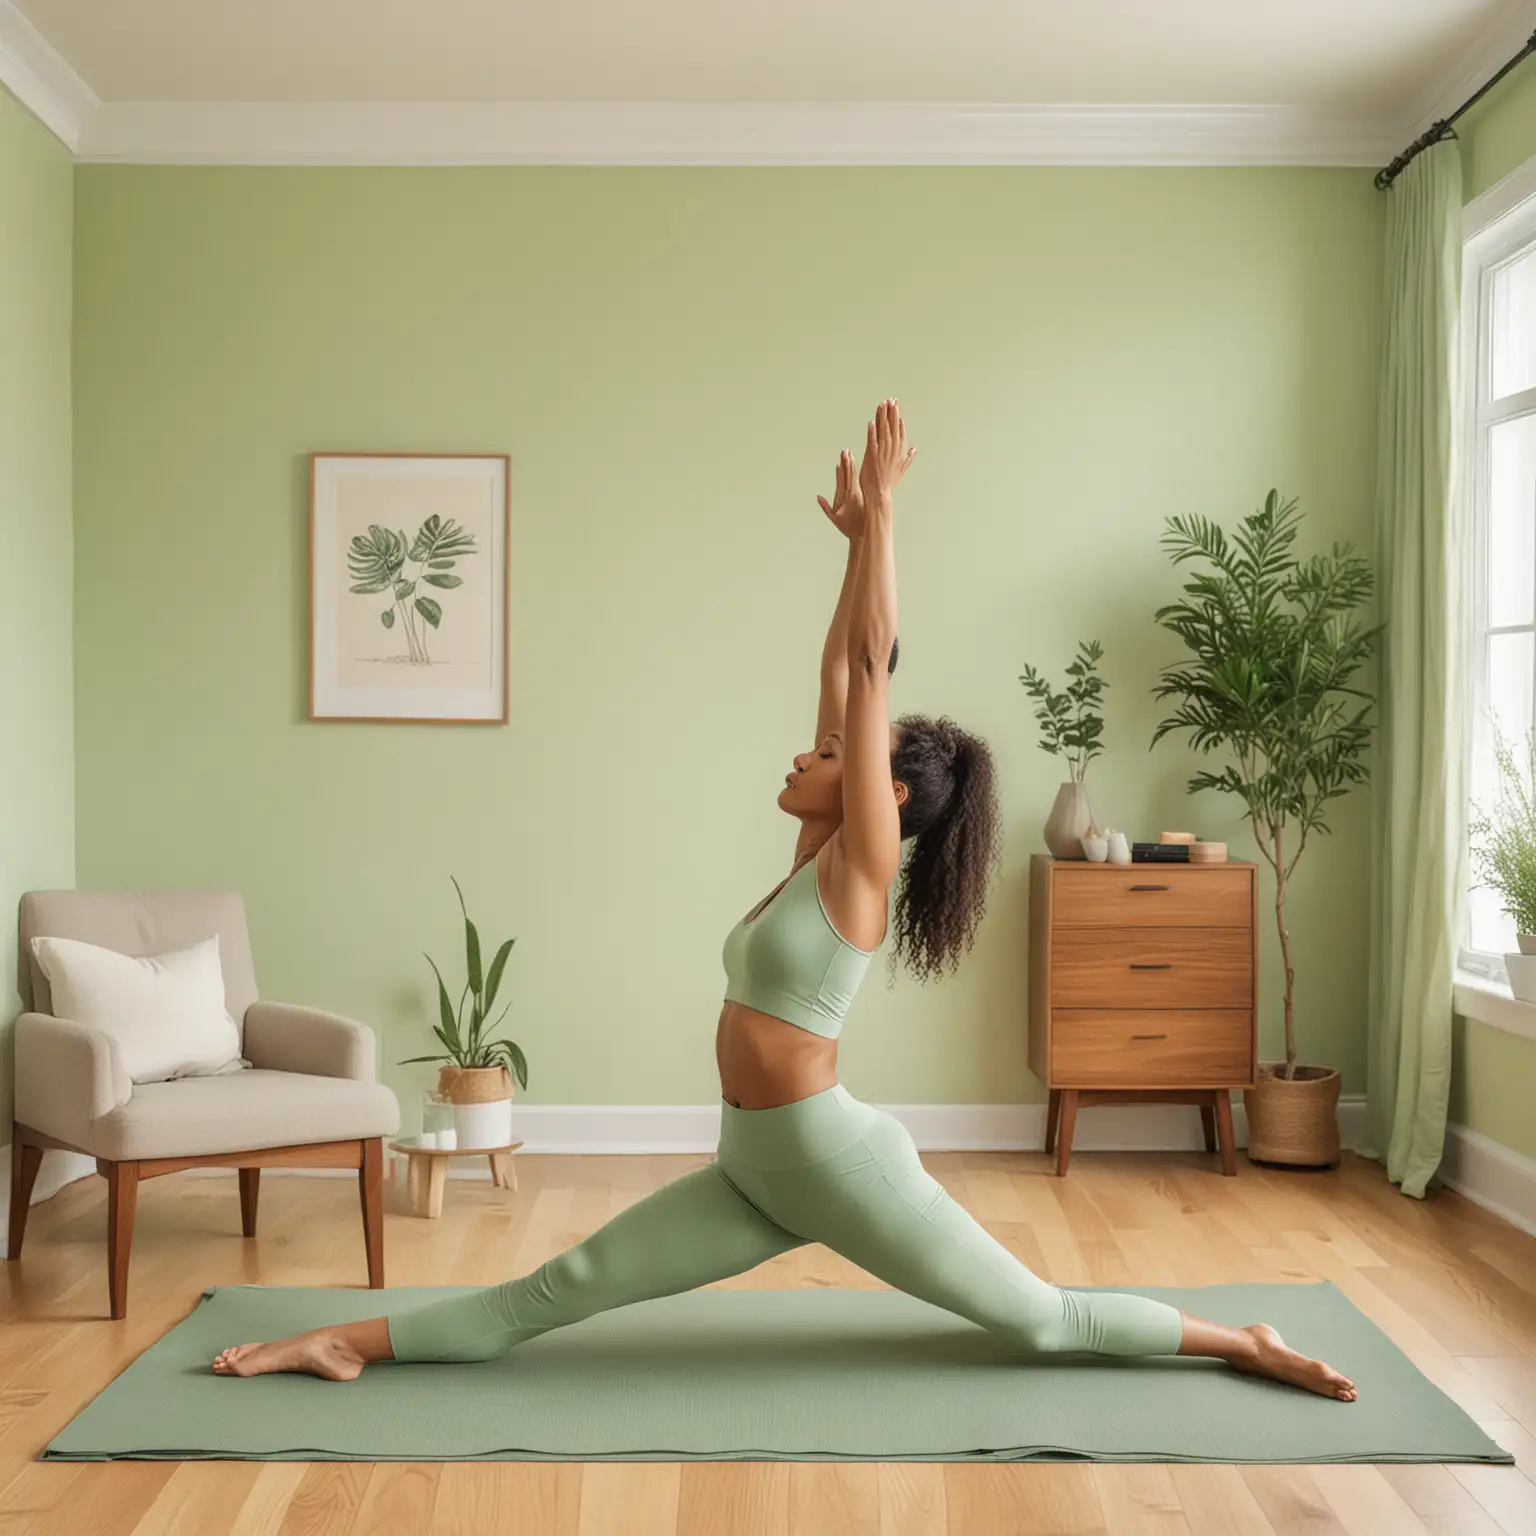 /imagine a simple hand drawn colored pencil drawing, of a biracial woman doing yoga in her living room, minimal, pencil texture, light green background